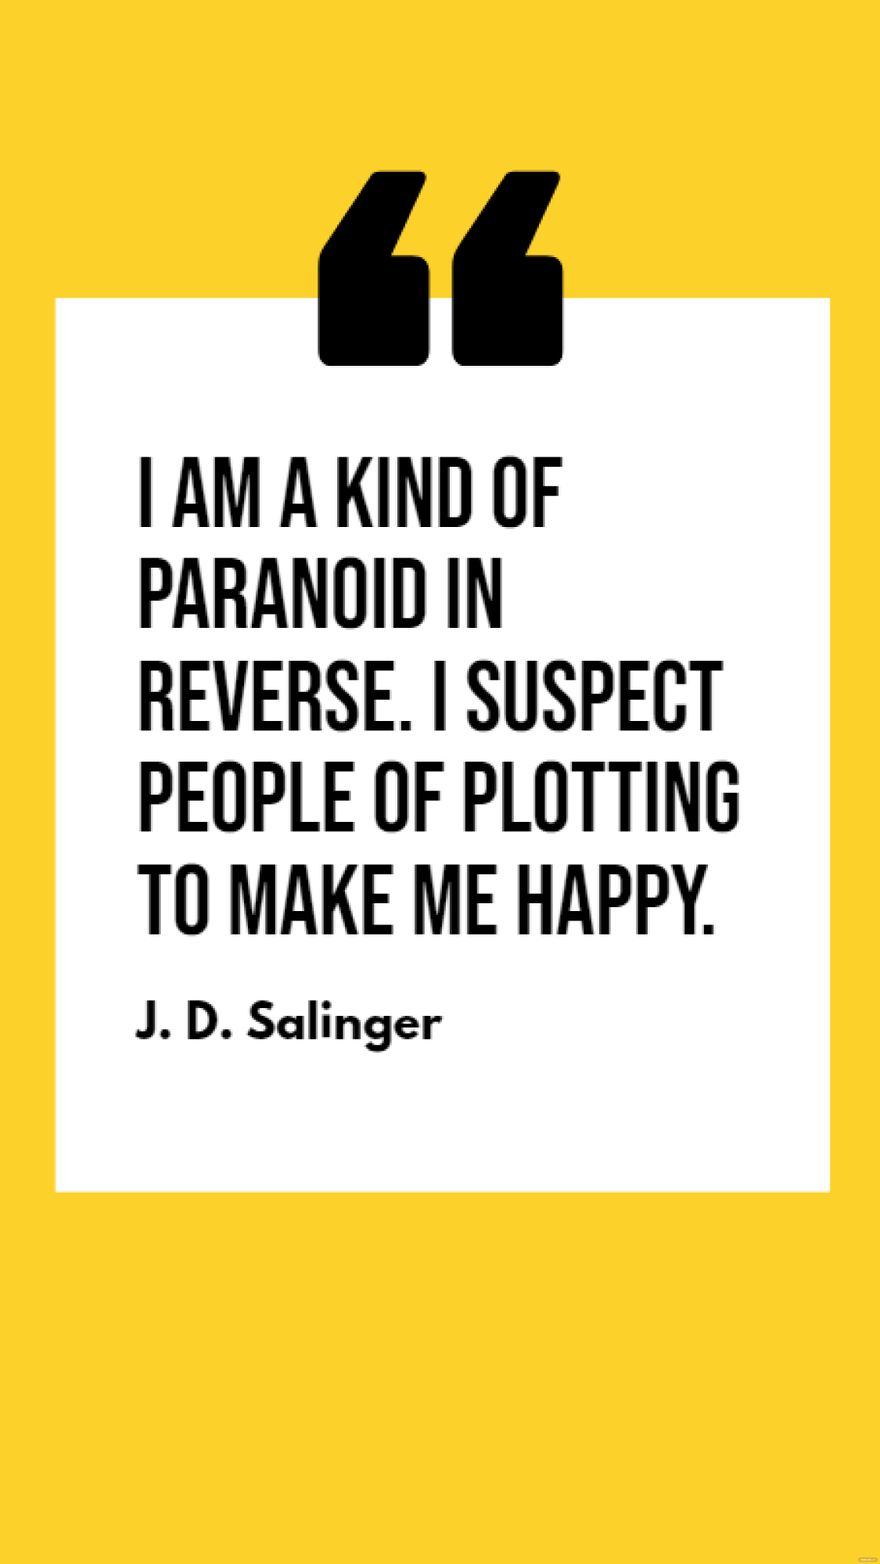 J. D. Salinger - I am a kind of paranoid in reverse. I suspect people of plotting to make me happy.